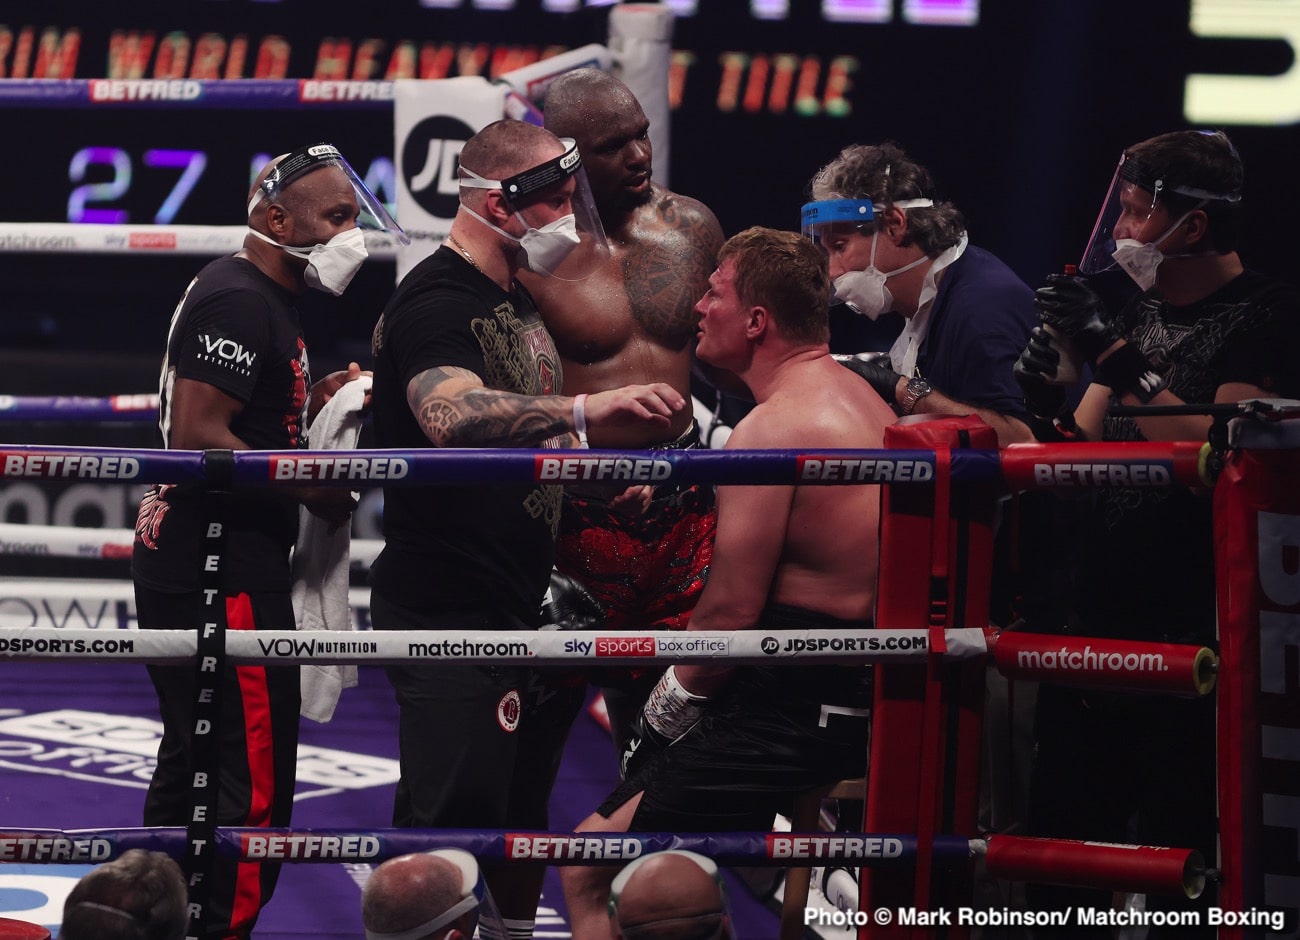 Dillian Whyte, Alexander Povetkin boxing photo and news image